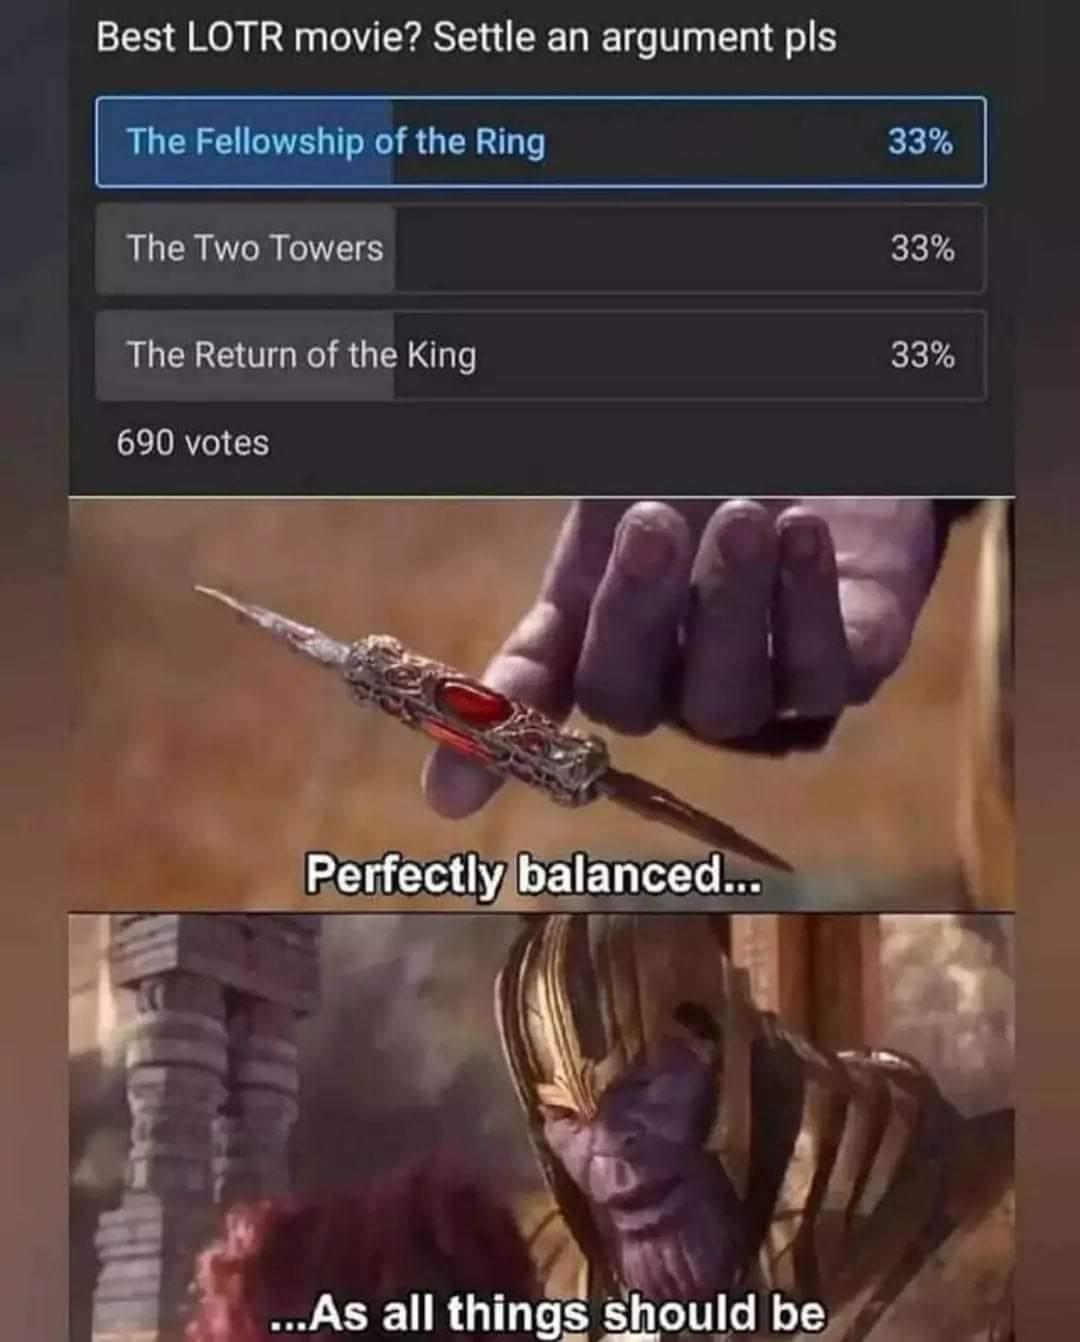 perfectly balanced as all things should - Best Lotr movie? Settle an argument pls The Fellowship of the Ring 33% The Two Towers 33% The Return of the King 33% 690 votes Perfectly balanced... ...As all things should be